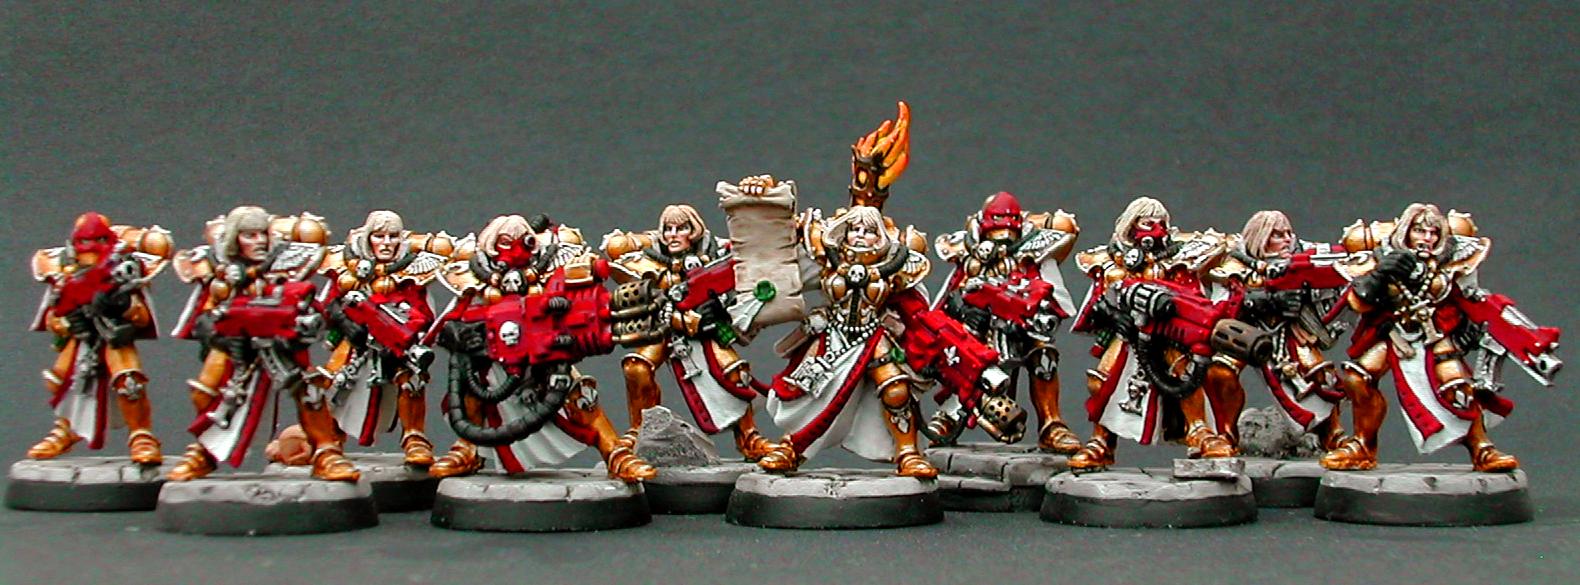 Gold, Sister, Sisters Of Battle, Warhammer 40,000